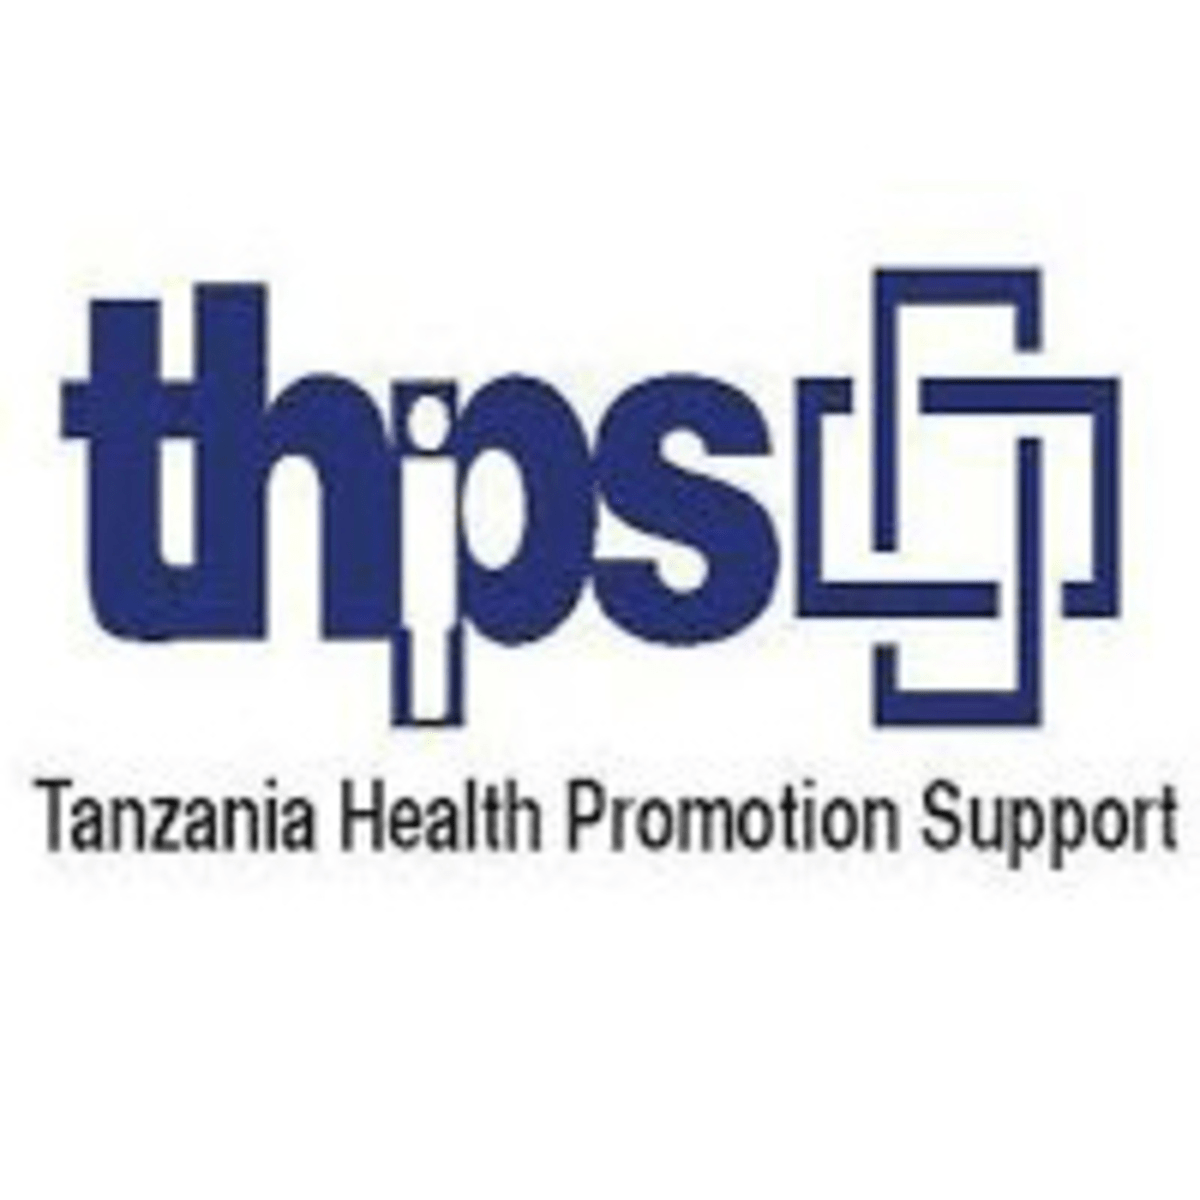 Latest Jobs at Tanzania Health Promotion Supports (THPS) 2021